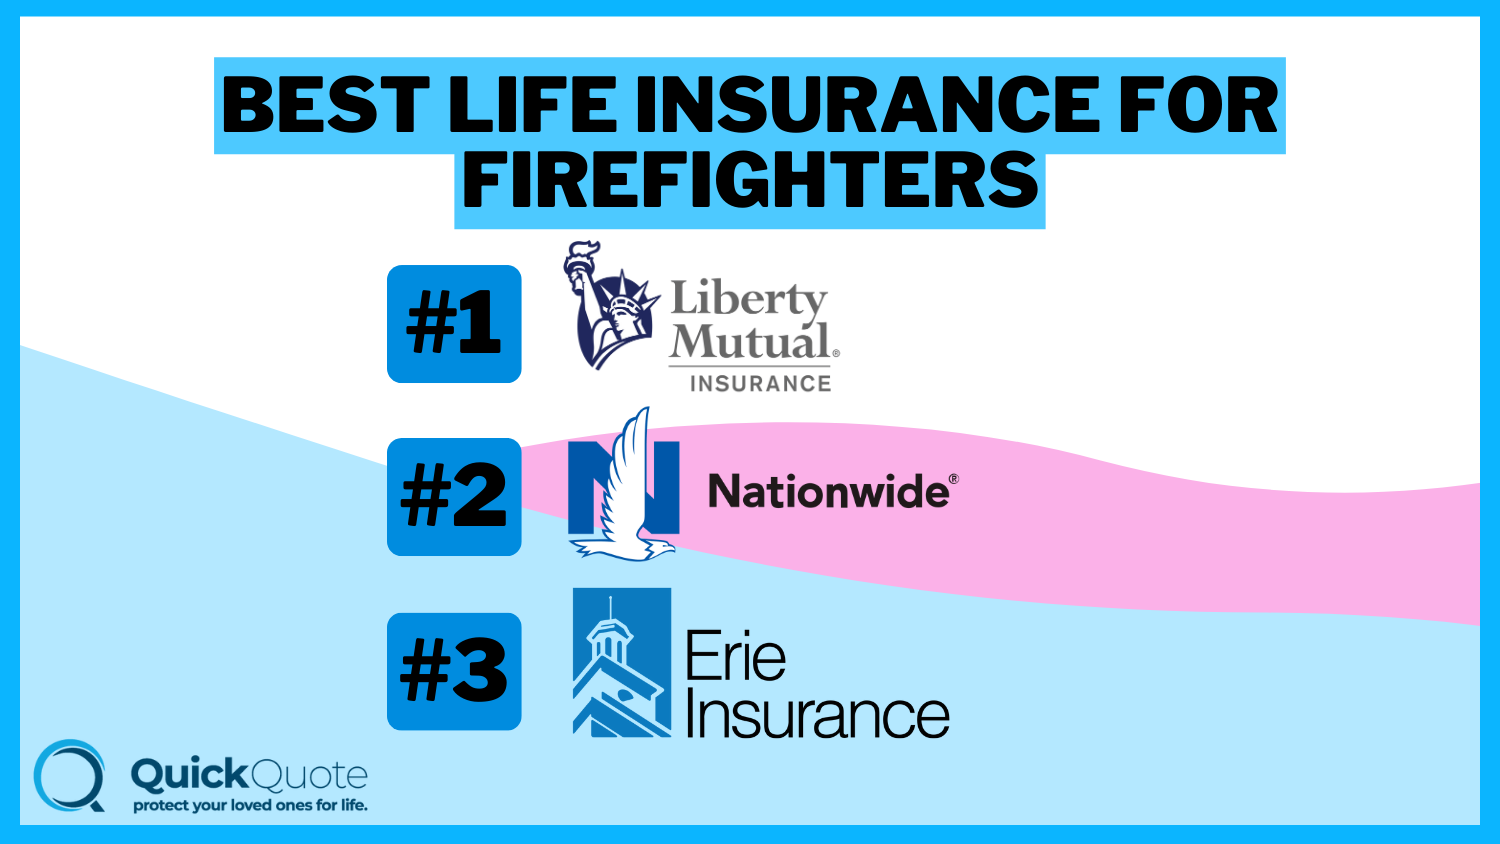 Best Life Insurance for Firefighters: Liberty Mutual, Nationwide, and Erie